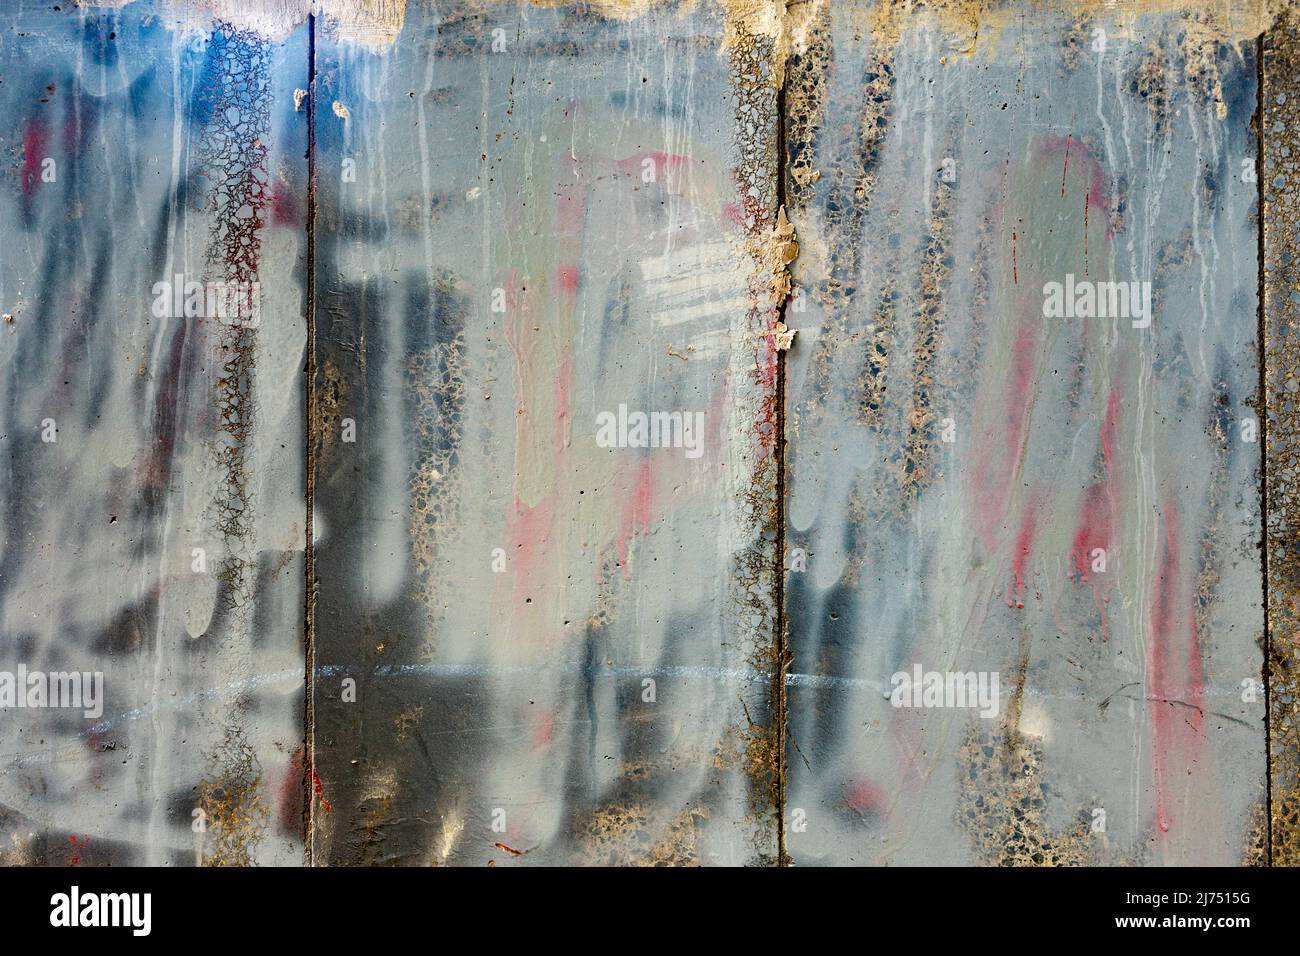 multicolored painted textured concrete surface. Propaganda and war. Stock Photo